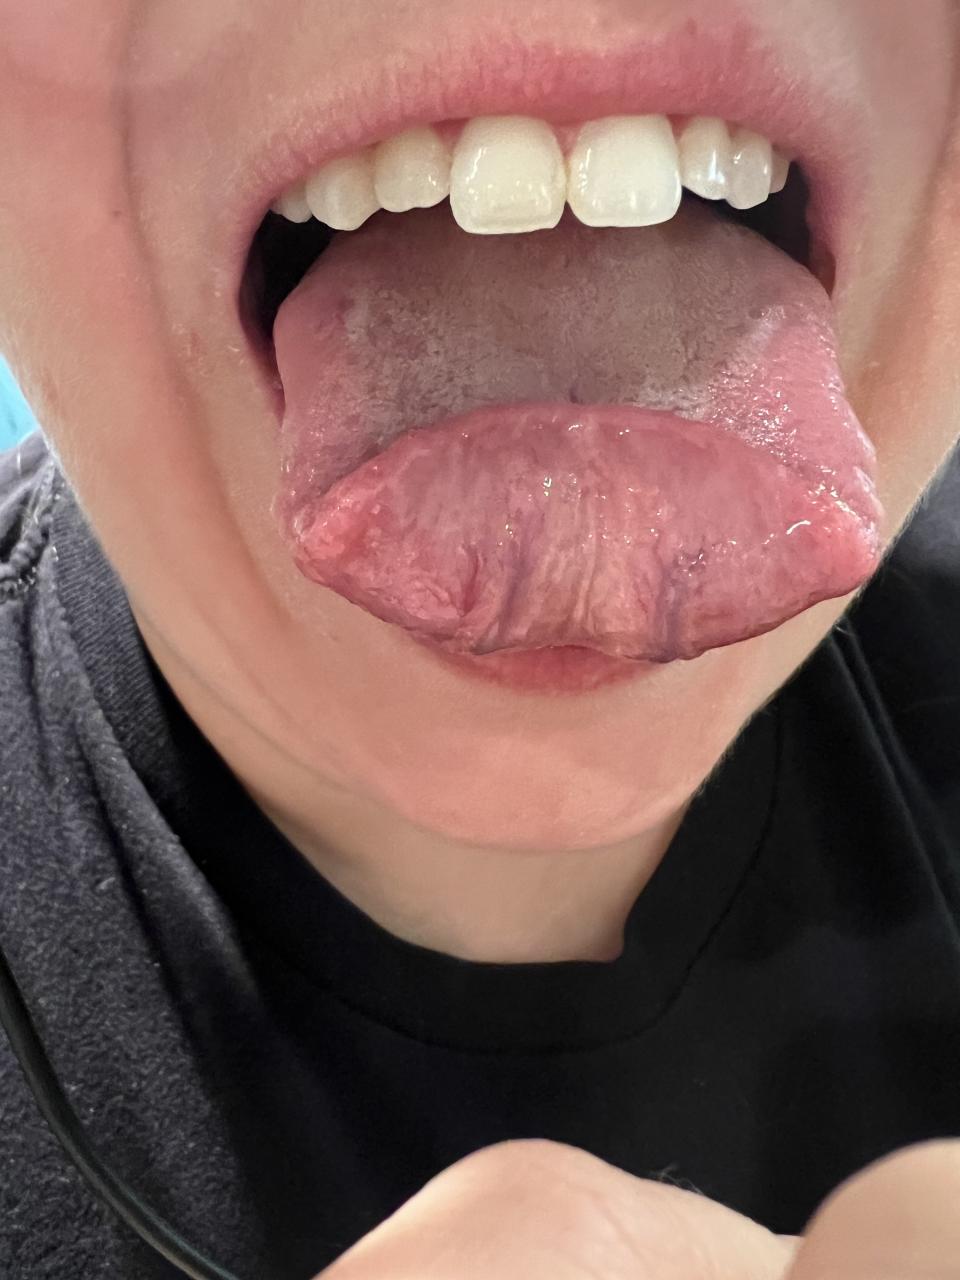 <div><p>"Only a small percentage of the population can fold their tongue in half. And I’m one of those lucky ones who can. I found this out this was rare at a Ripley’s Believe it or Not museum."</p><p>—Anonymous</p></div><span> BuzzFeed</span>